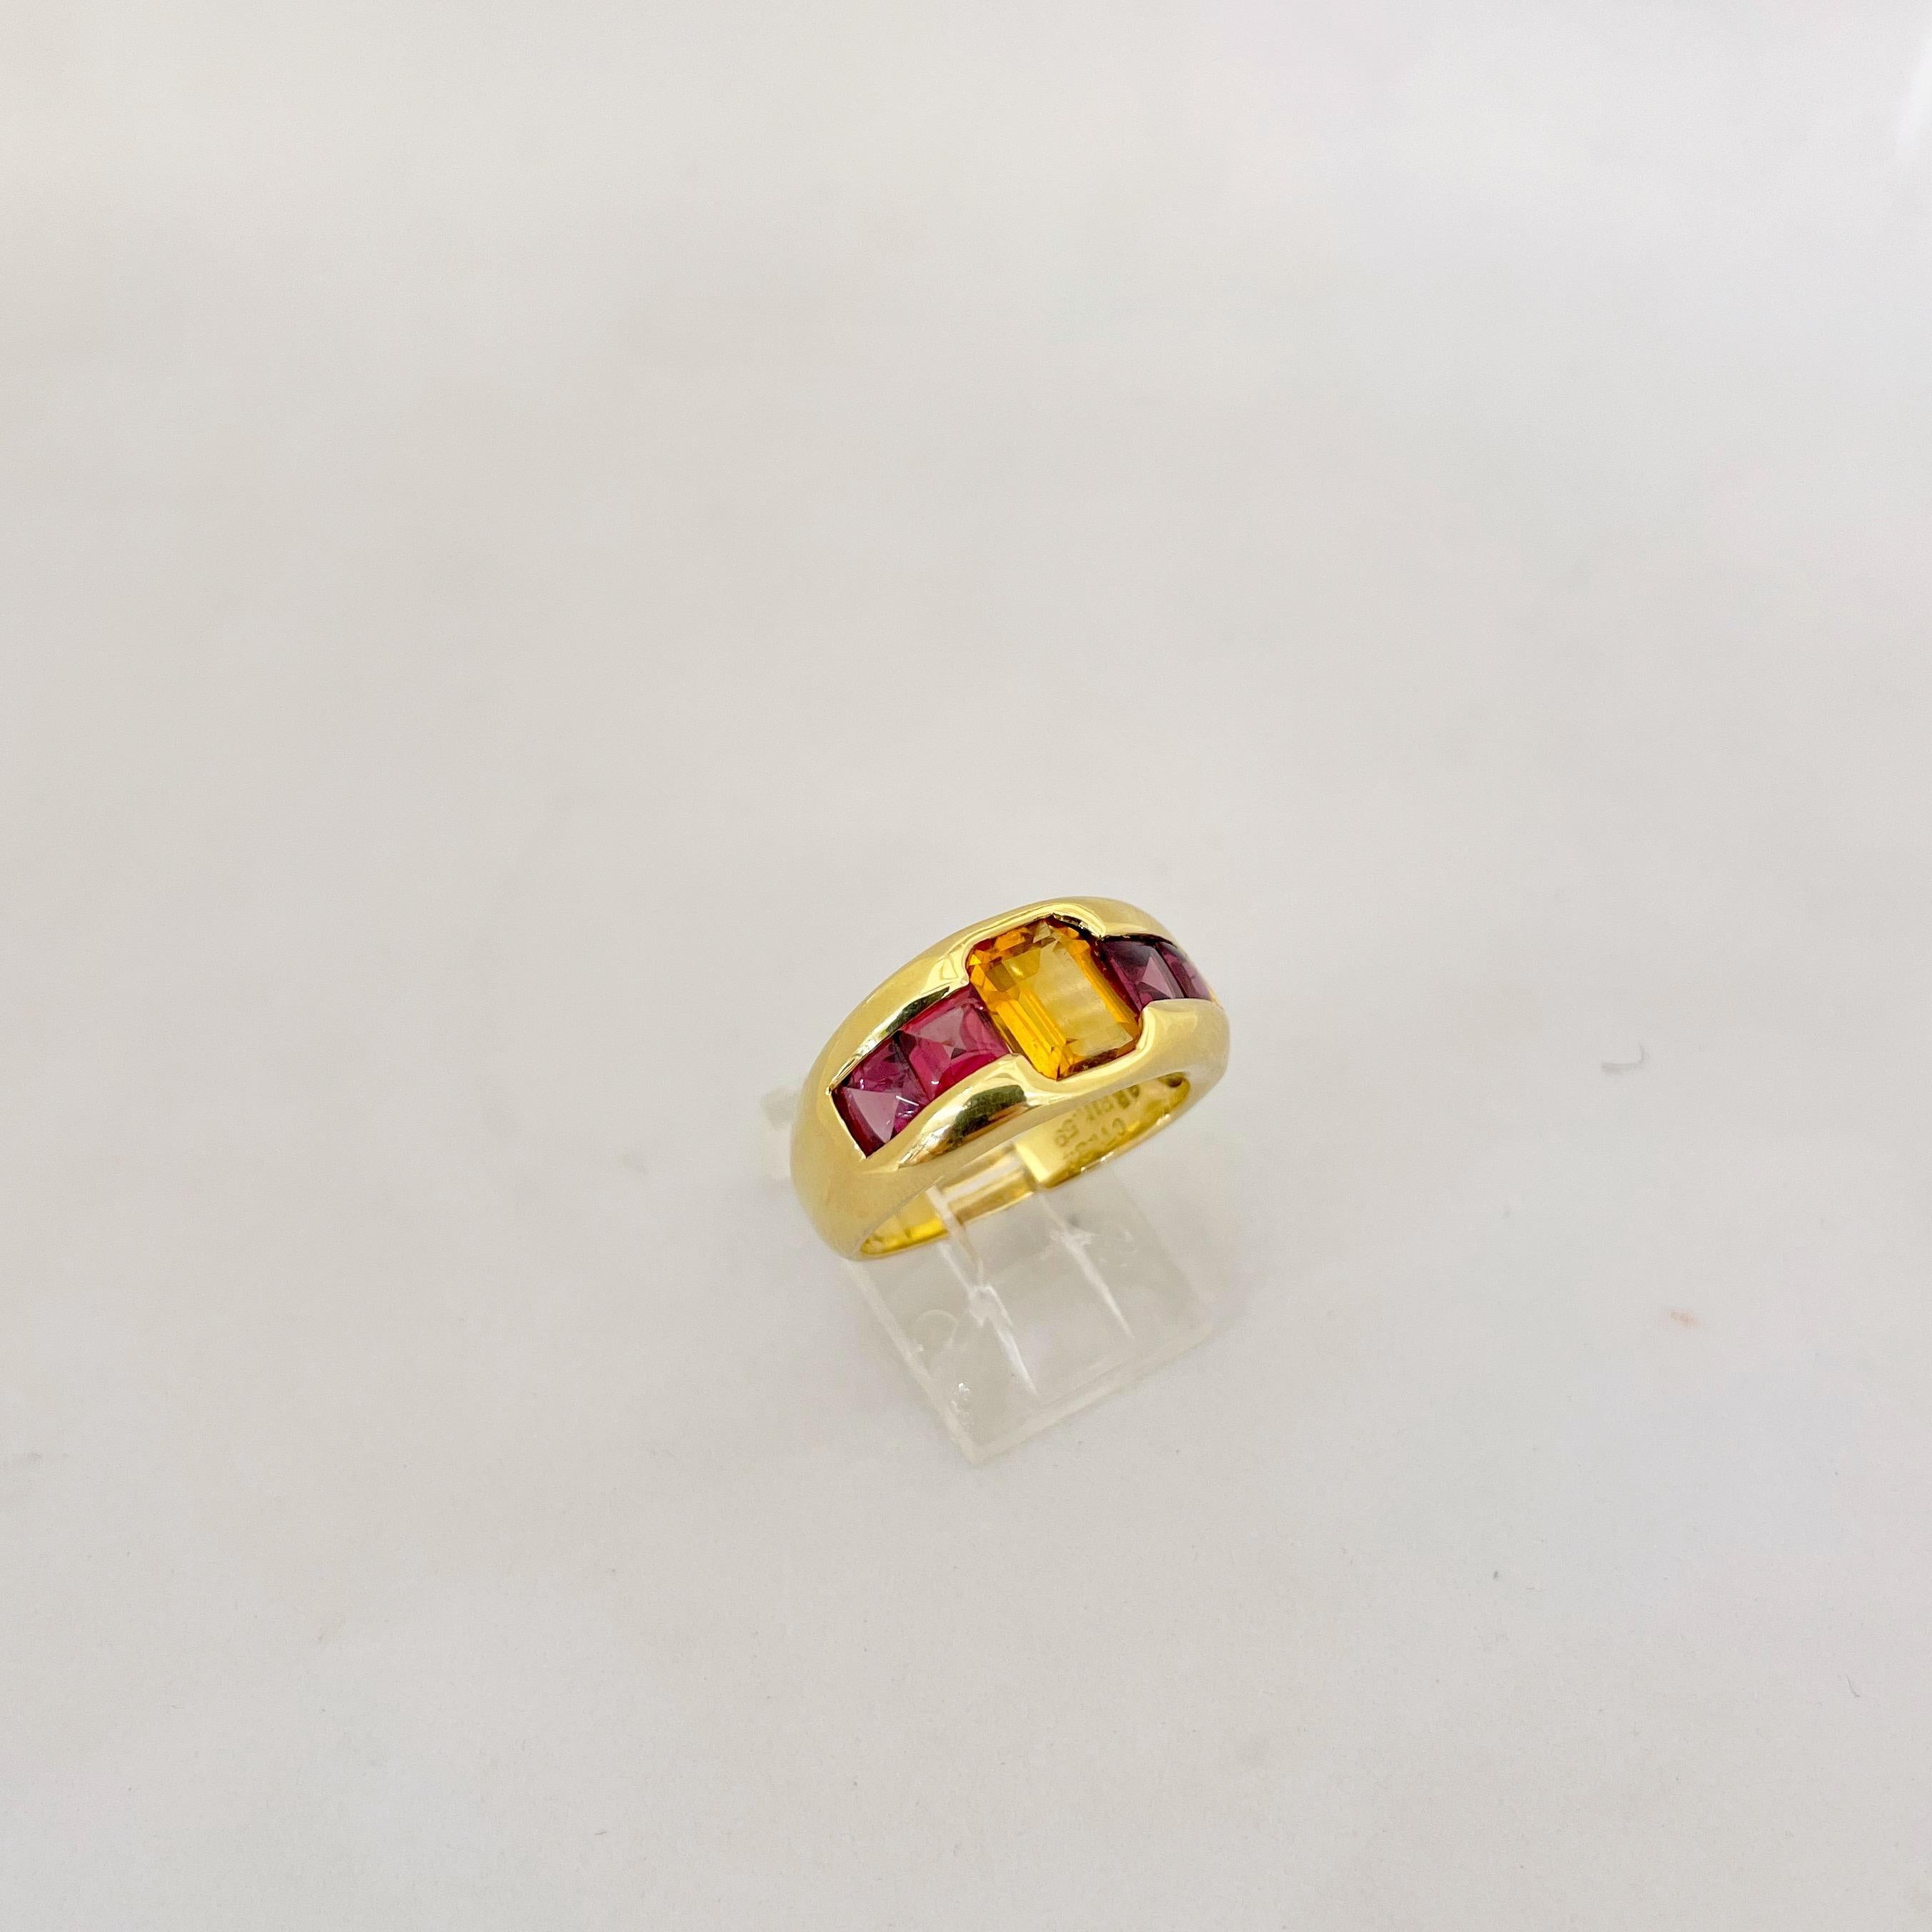 Gregg Ruth 18KT Yellow Gold Ring with 1.34Ct. Citrine Center & 1.59Ct. Rhodolite For Sale 5